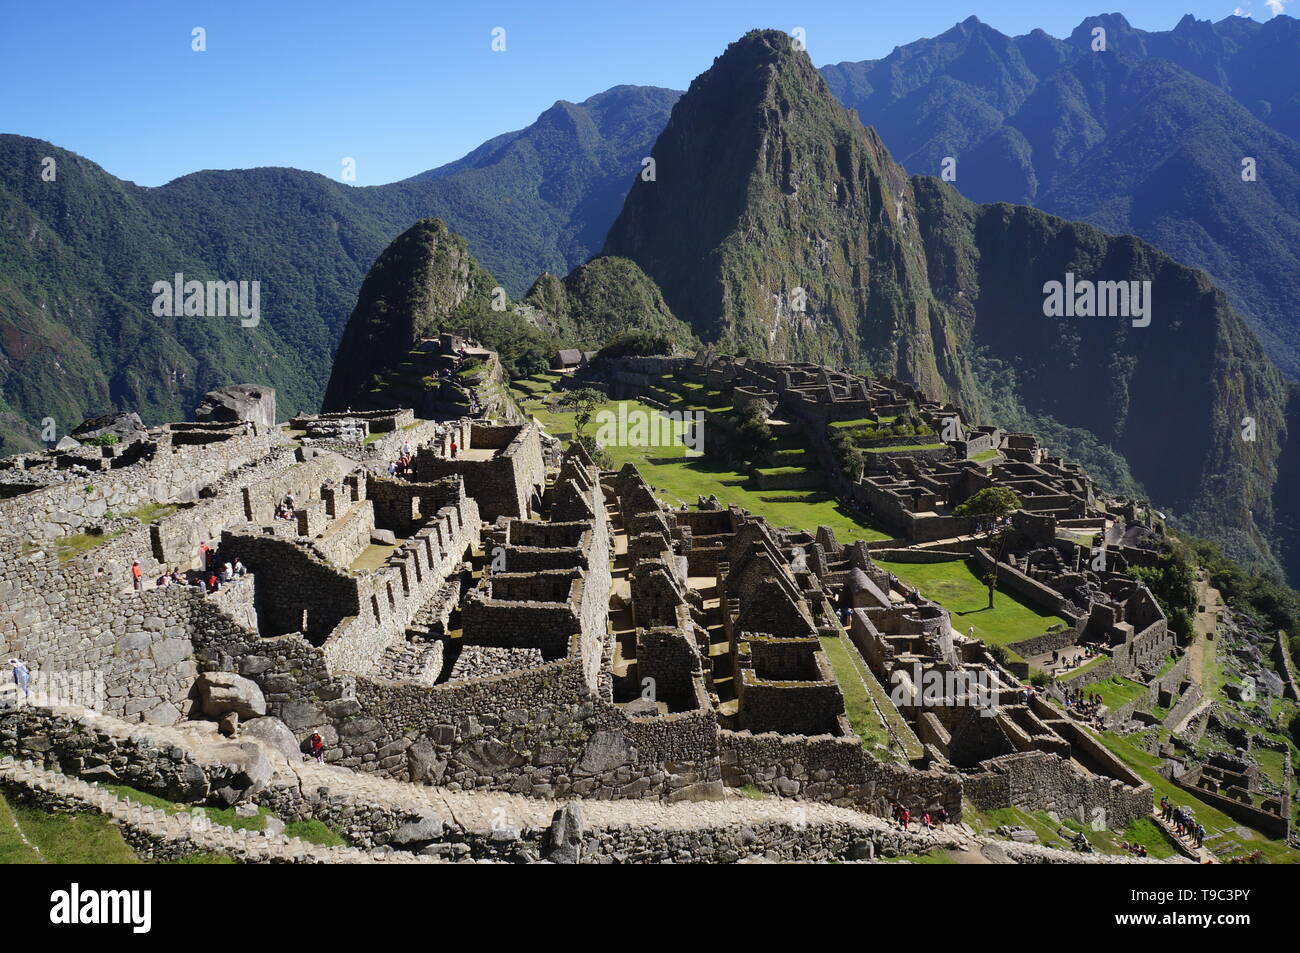 A spectacular view over the Inca ruins of Machu Picchu with a view of Huayna Picchu and the surrounding mountains of the Andes, Peru, South America. Stock Photo